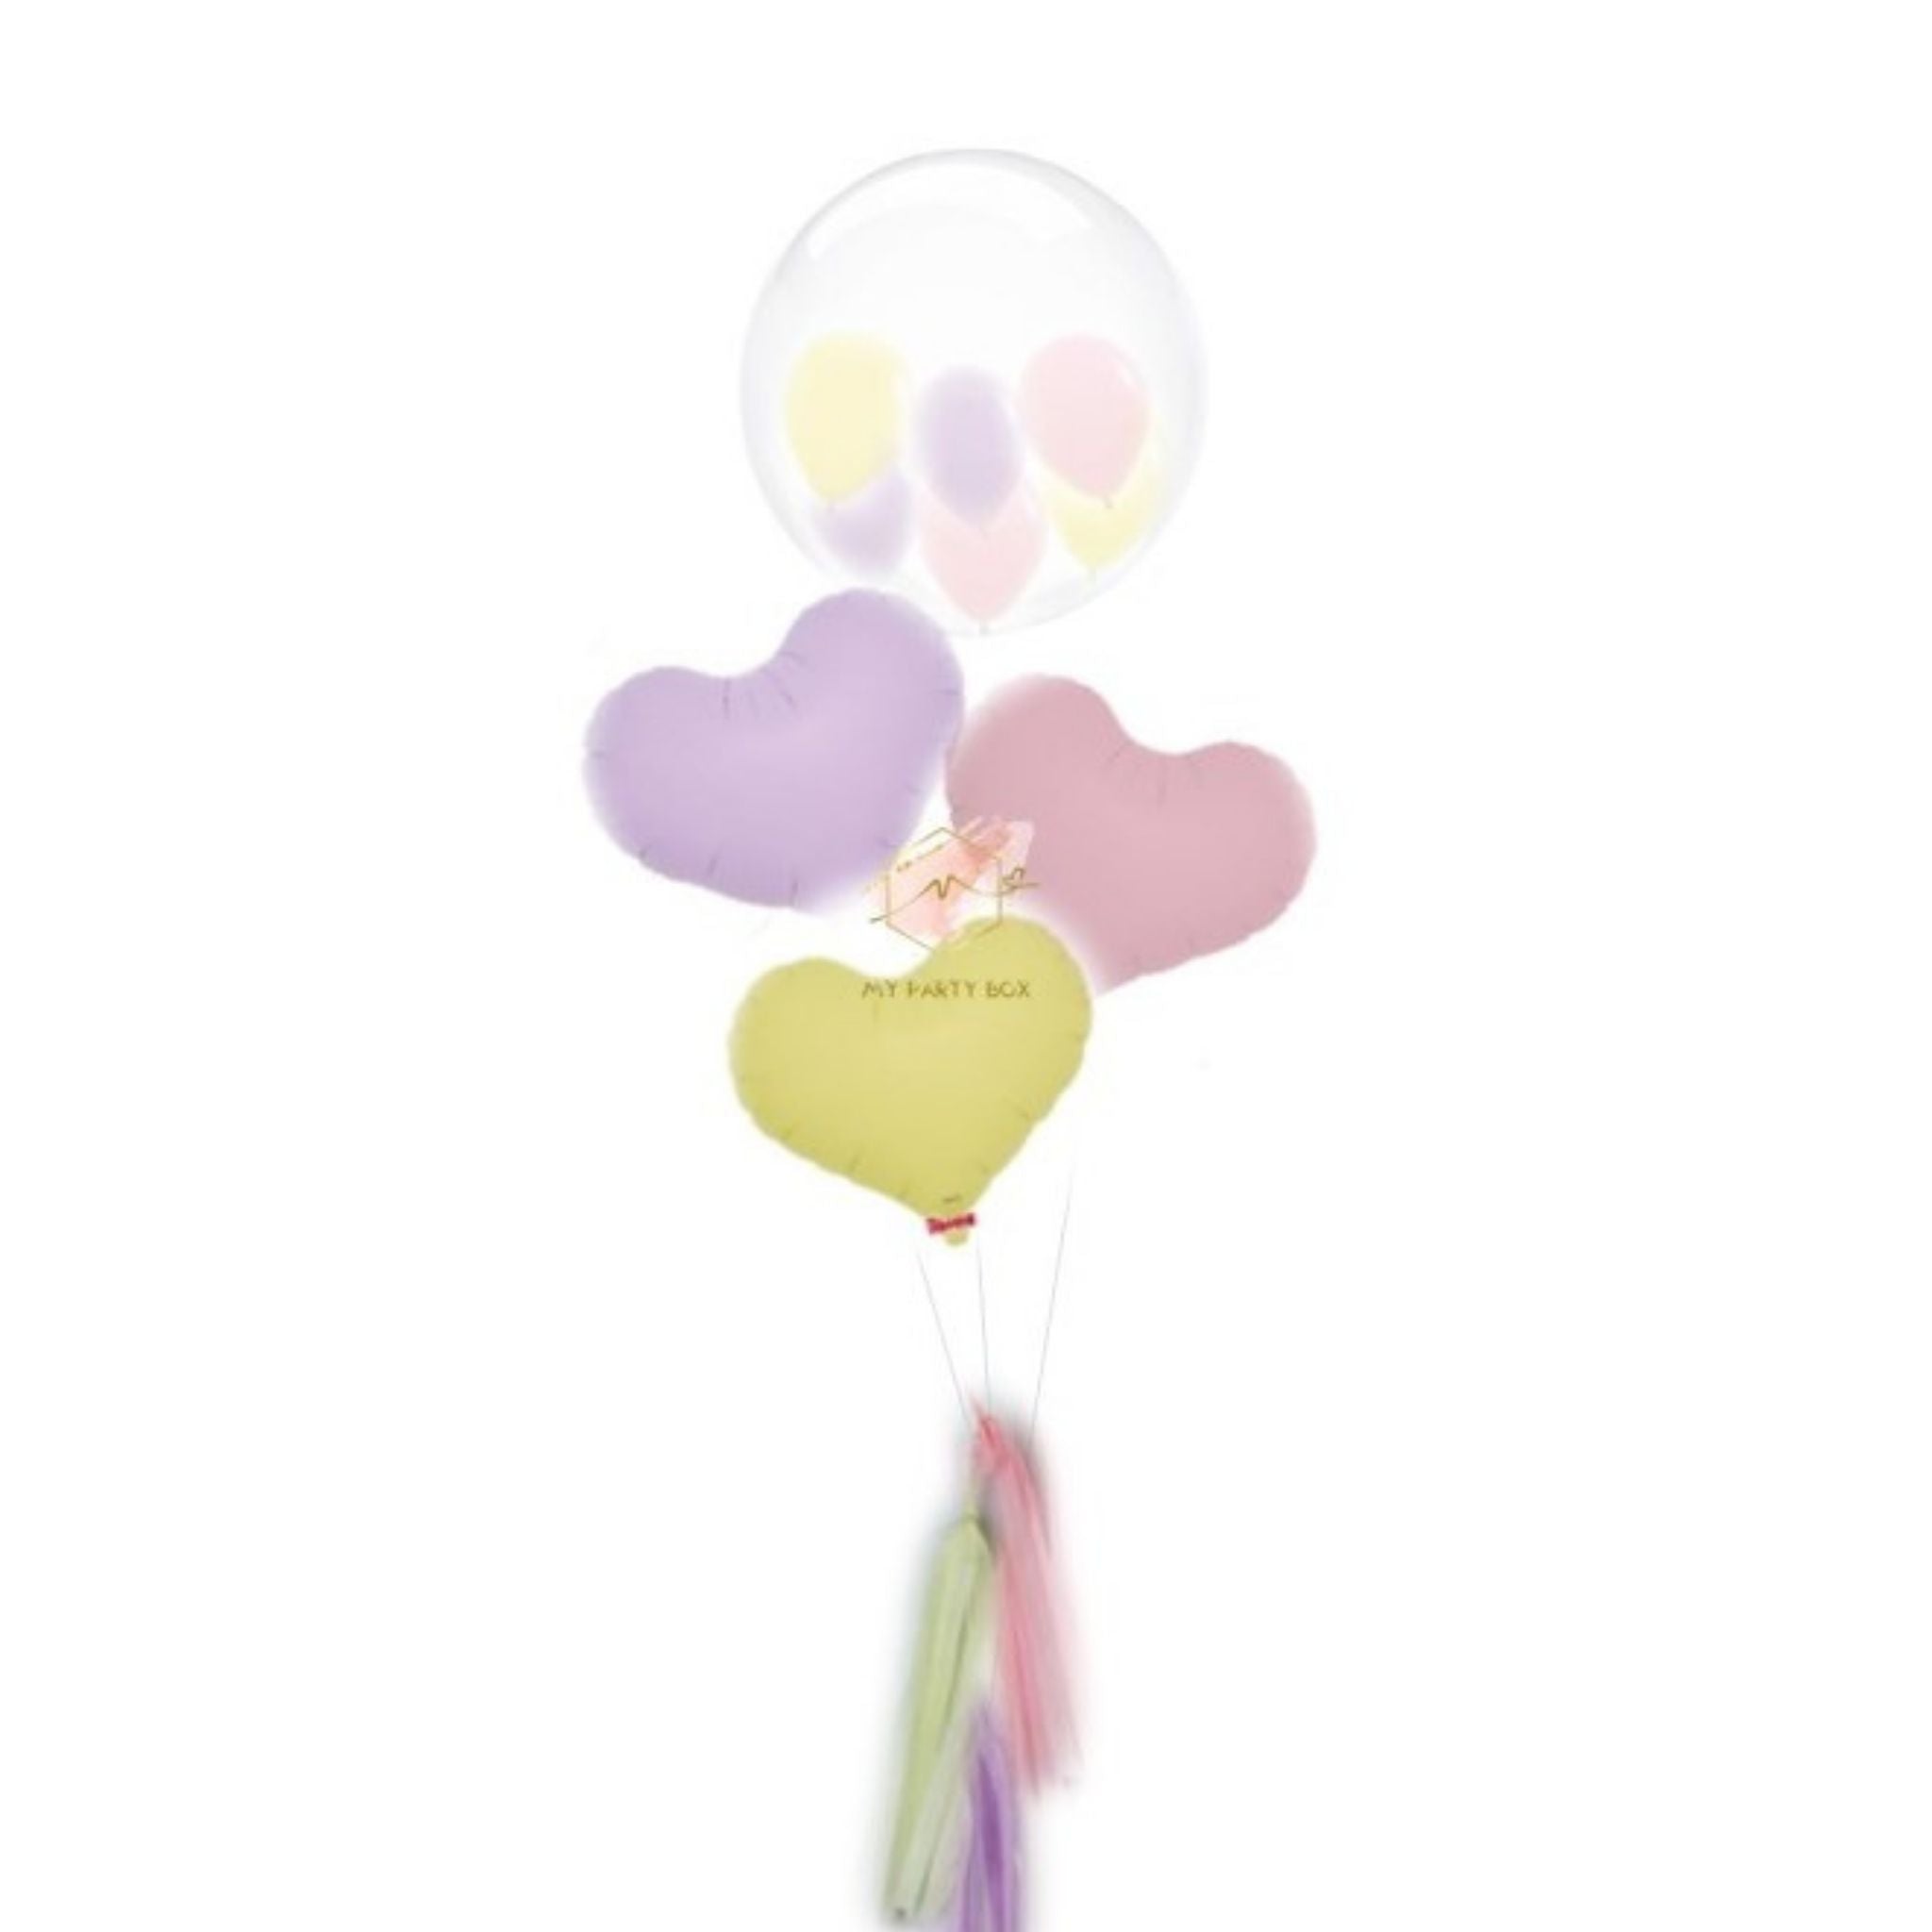 My Party Box Bubble Gum Balloon Bouquet with one bubble balloon with mini latex balloon inside and one pastel Pink foil heart balloon, one Pastel Purple foil heart balloon and one pastel yellow  Heart Balloon